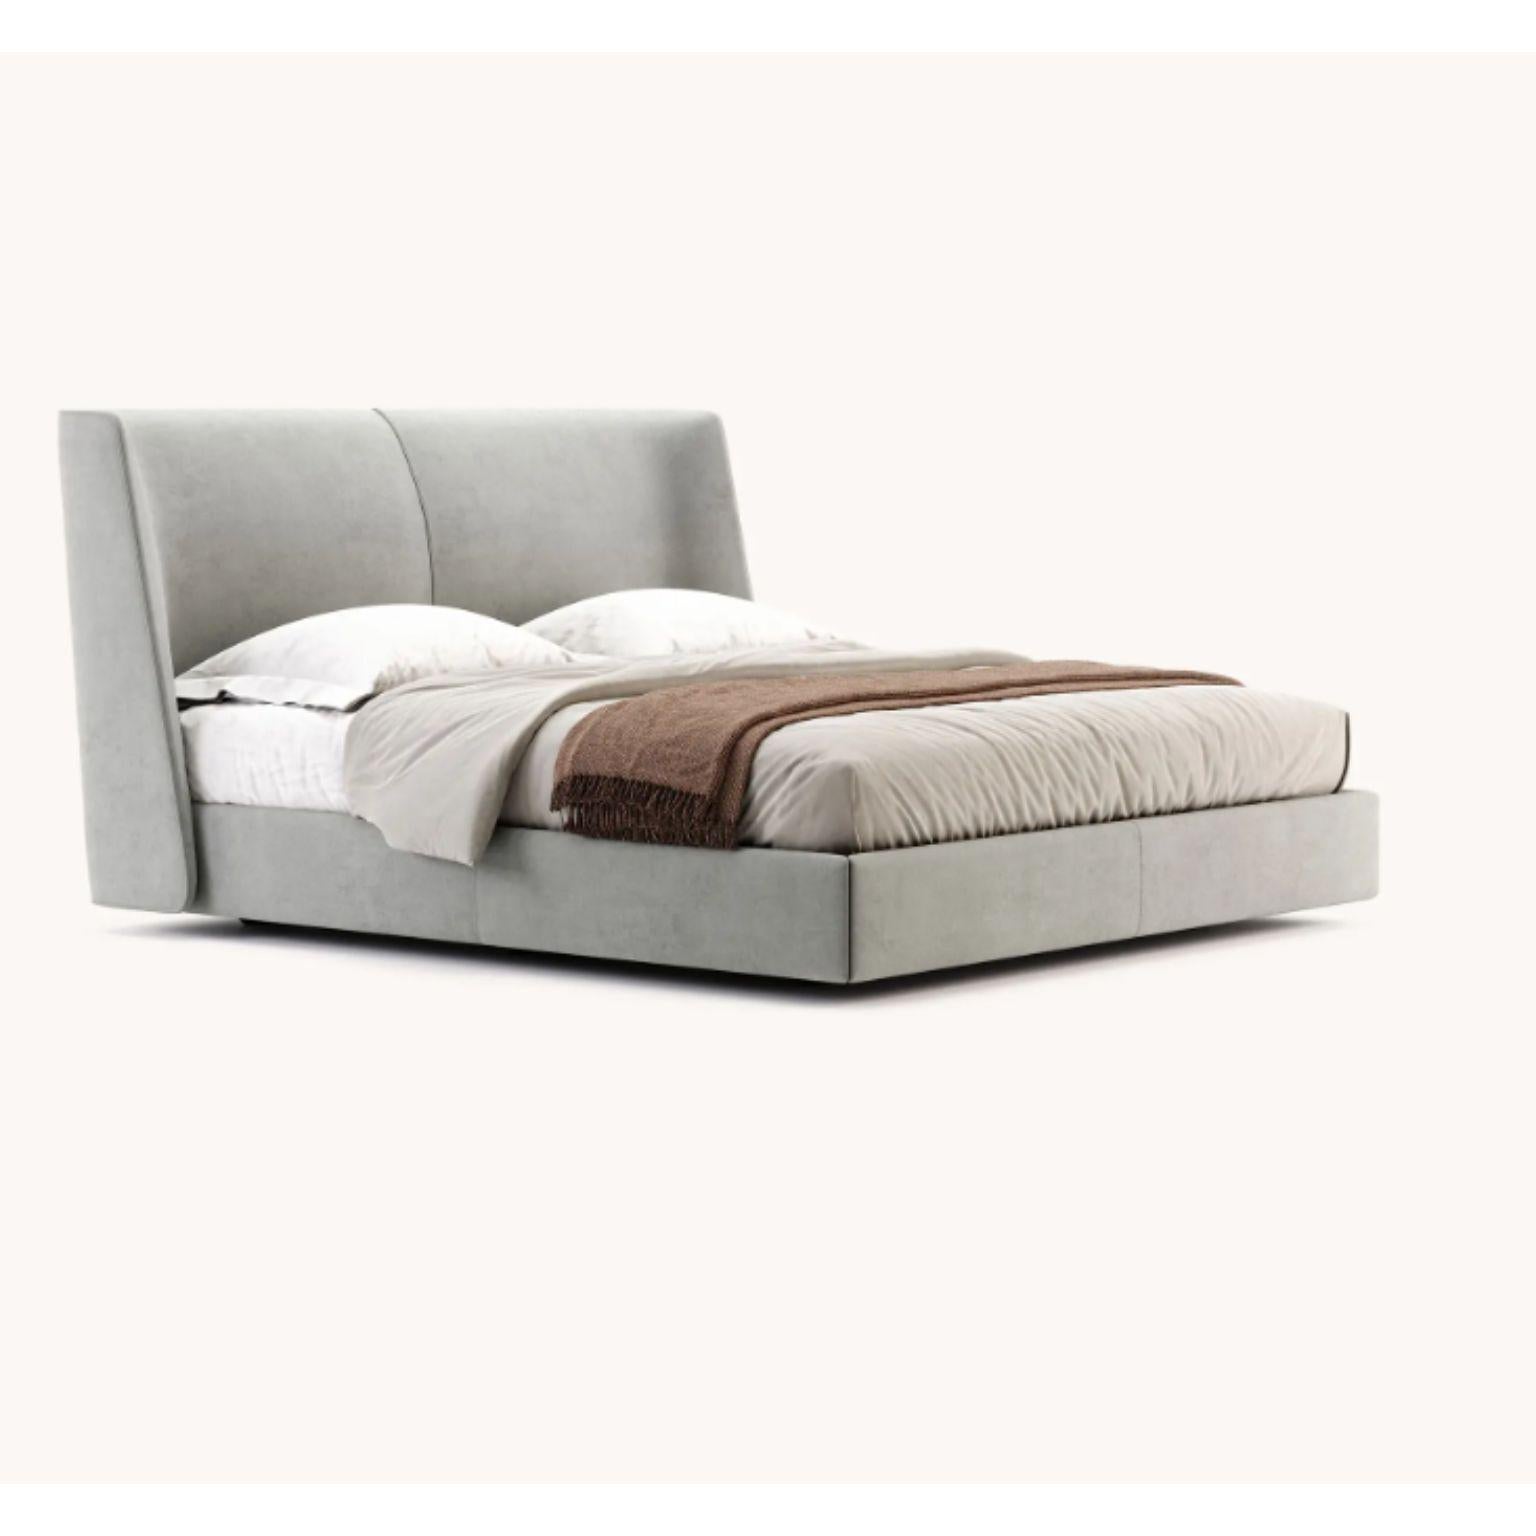 King size Echo bed by Domkapa
Dimensions: W 219 x D 233.5 x H 115 cm.
Materials: Velvet (Aldan 2921).
Also available in different materials.

Echo is the ideal bed design if you are looking for comfort allied with stunning features and details.